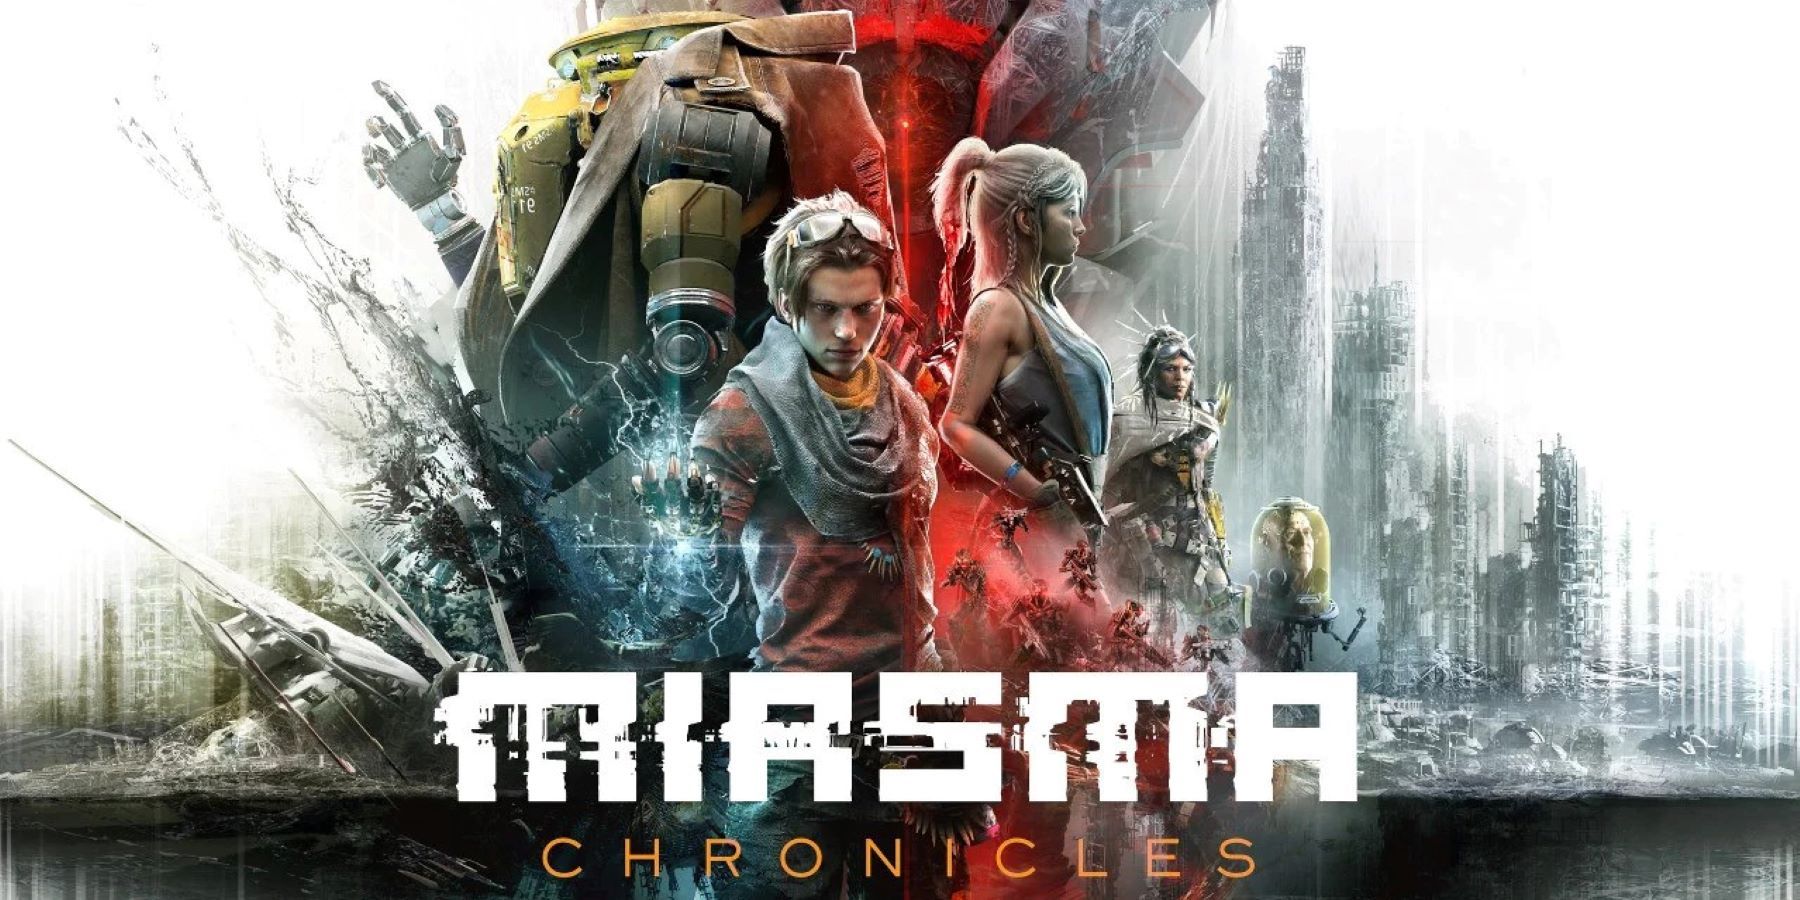 Key art for Miasma chronicles with Elvis at center